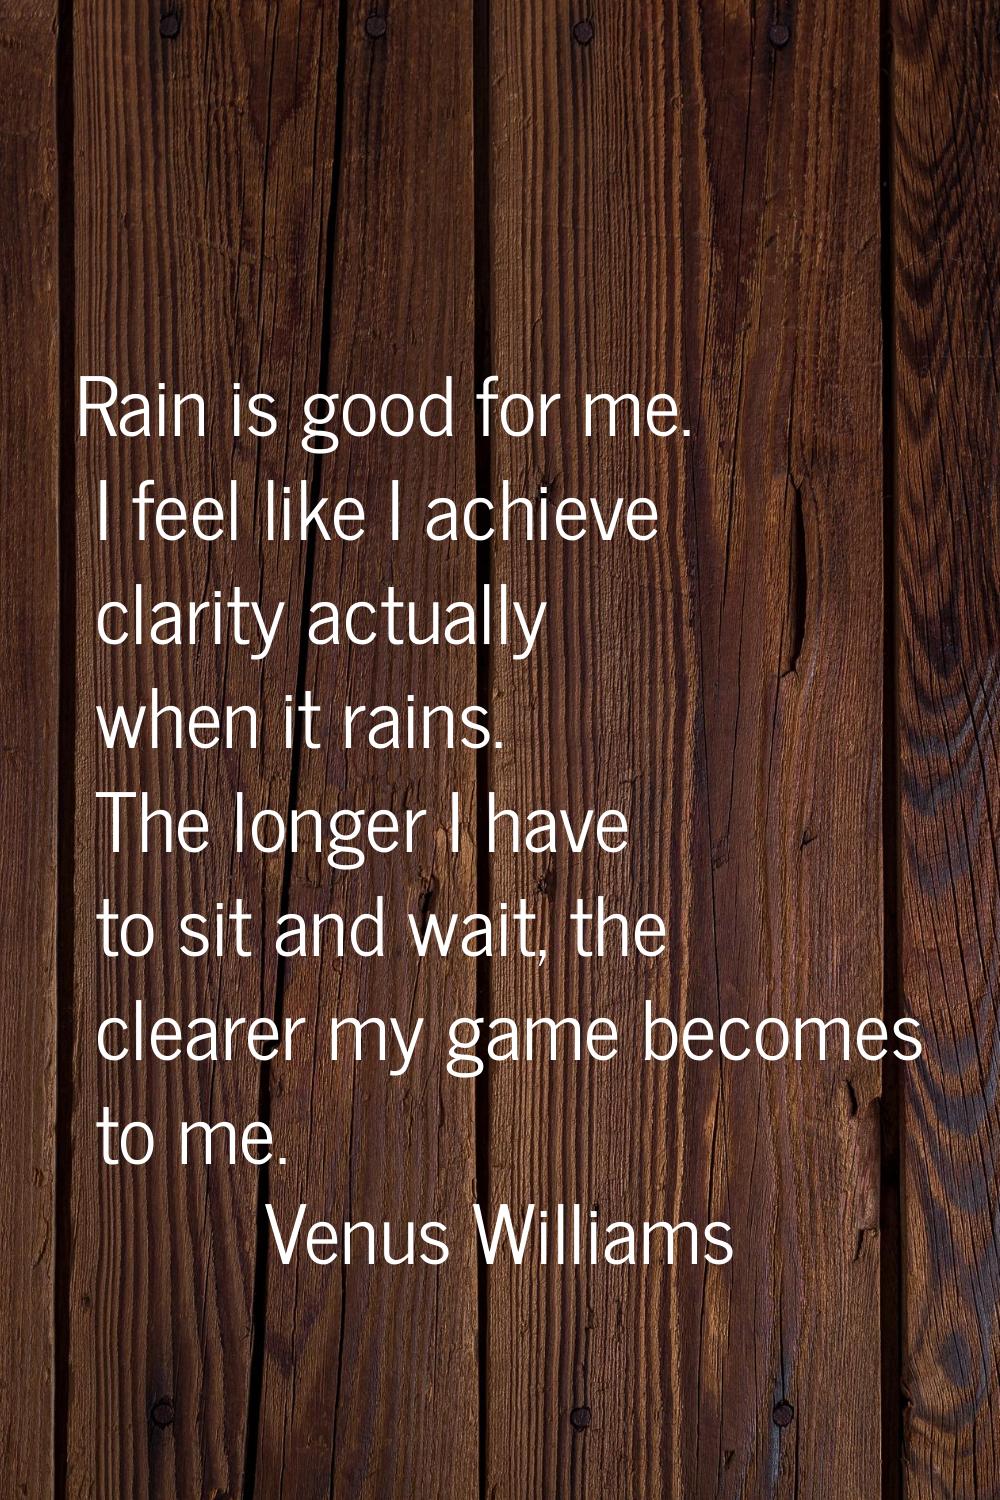 Rain is good for me. I feel like I achieve clarity actually when it rains. The longer I have to sit